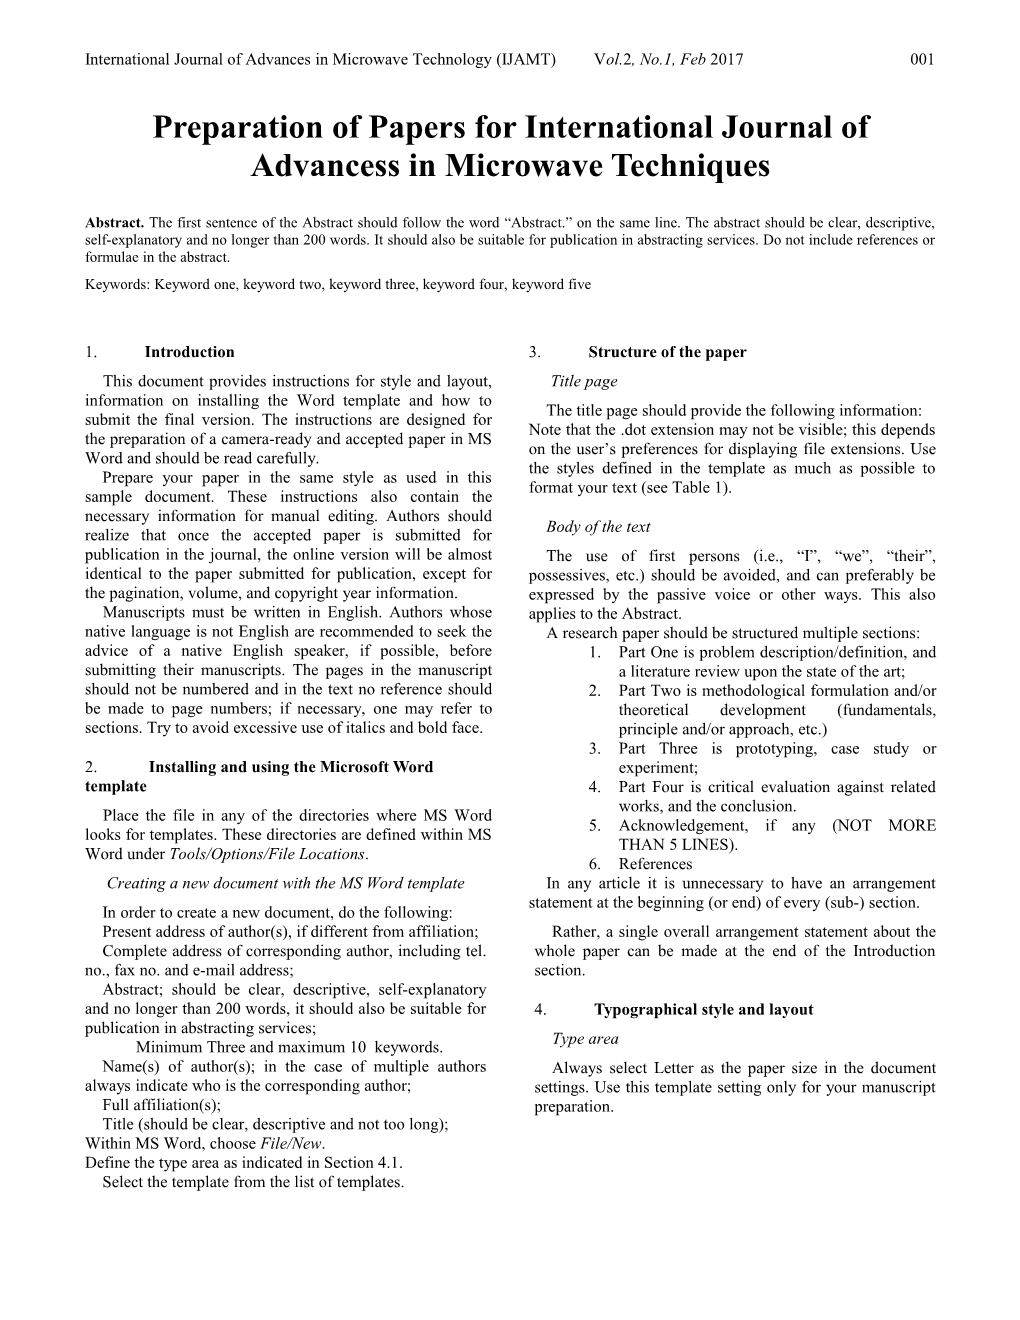 Preparation of Papers for International Journal of Advancess in Microwave Techniques